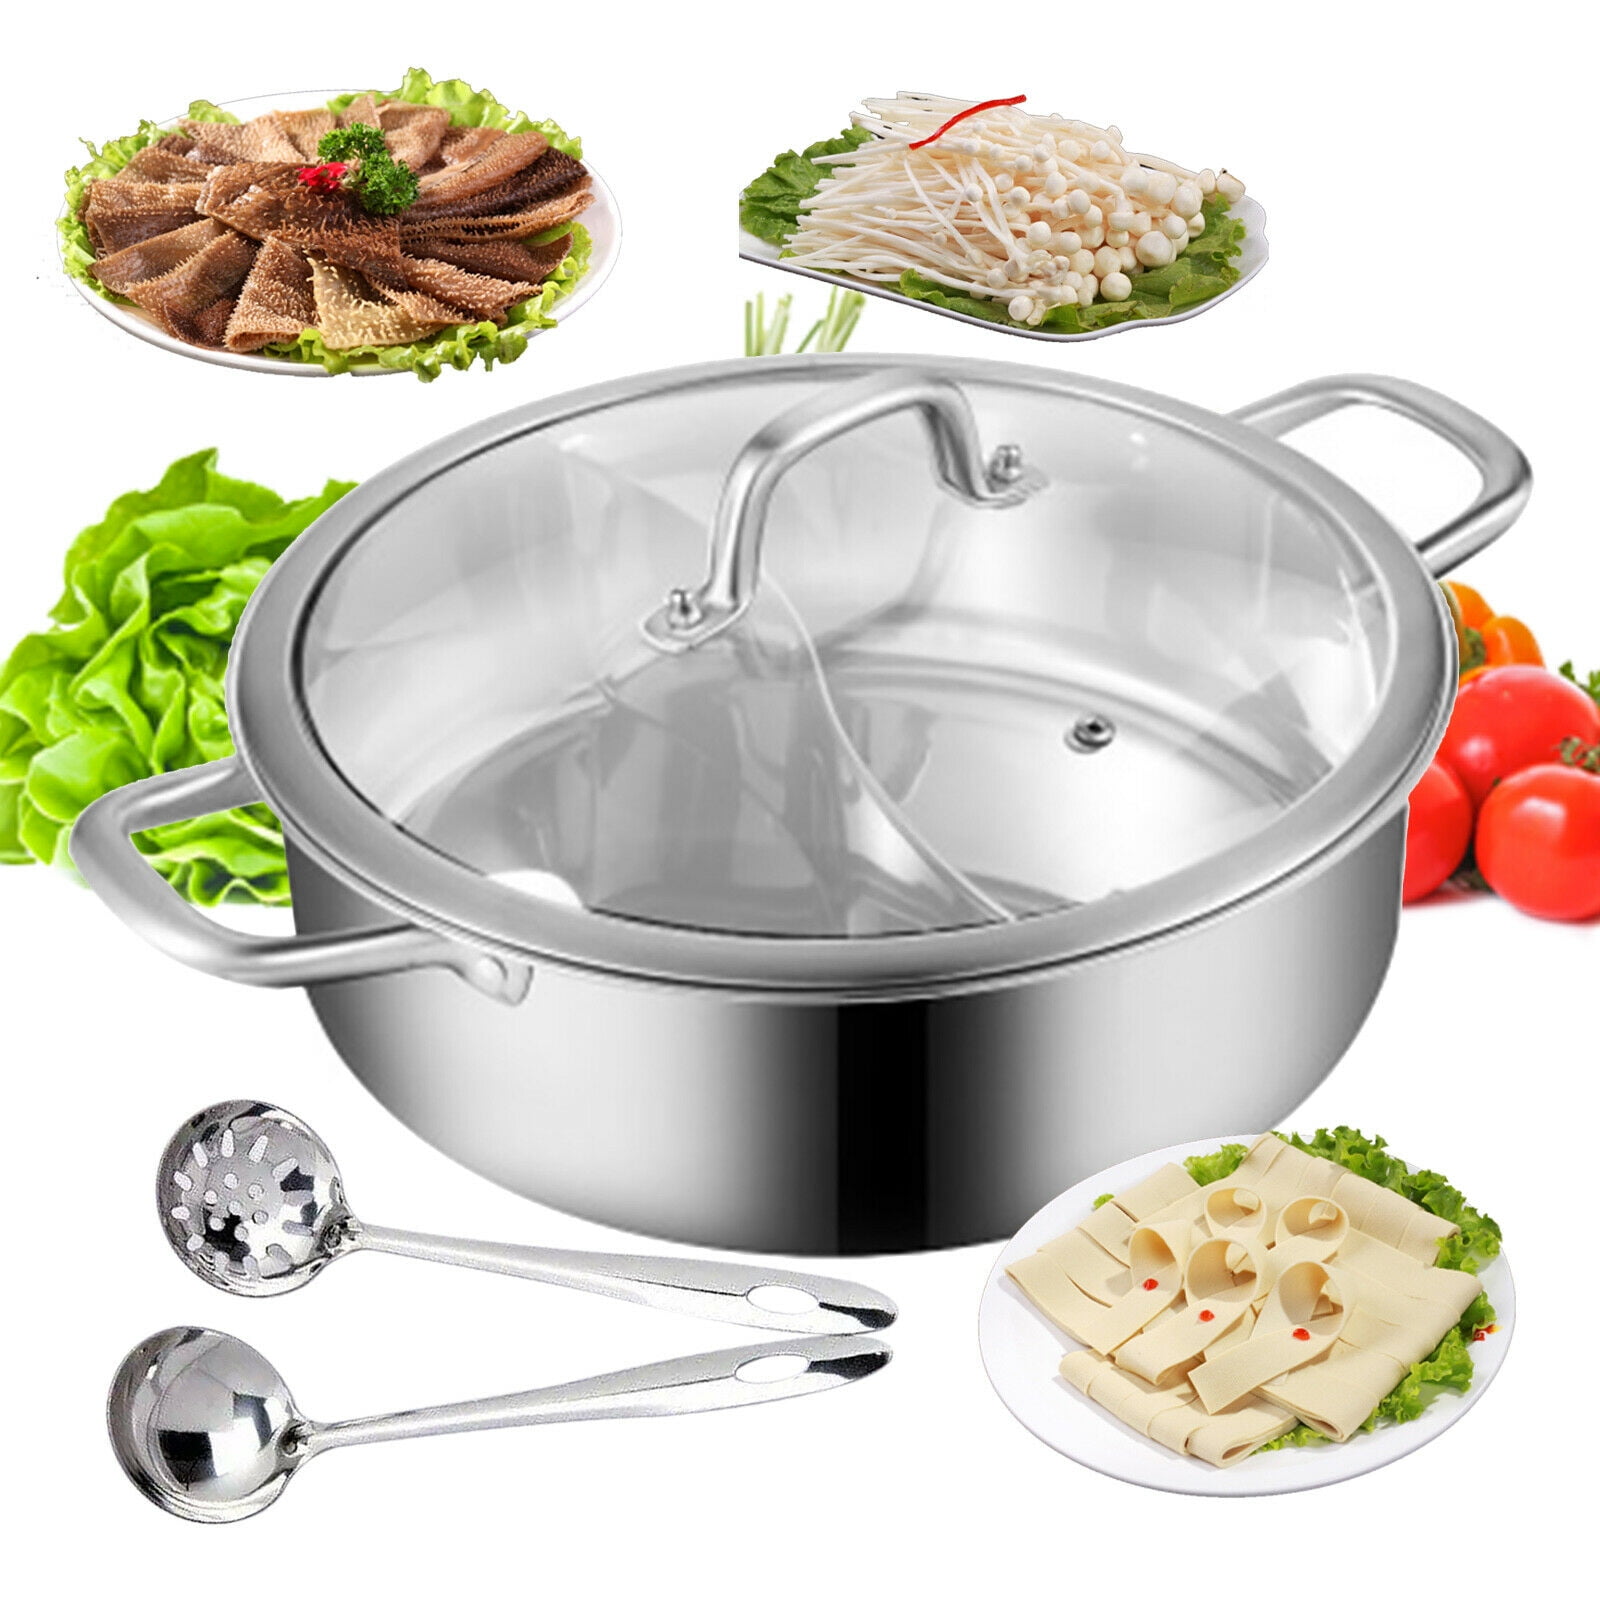 Yardwe Stainless Steel Hot Pot with Divider Chinese Induction Shabu Pot  Dual Sided Soup Cookware with Glass Lid for Induction Cooktop Gas Stove 34cm